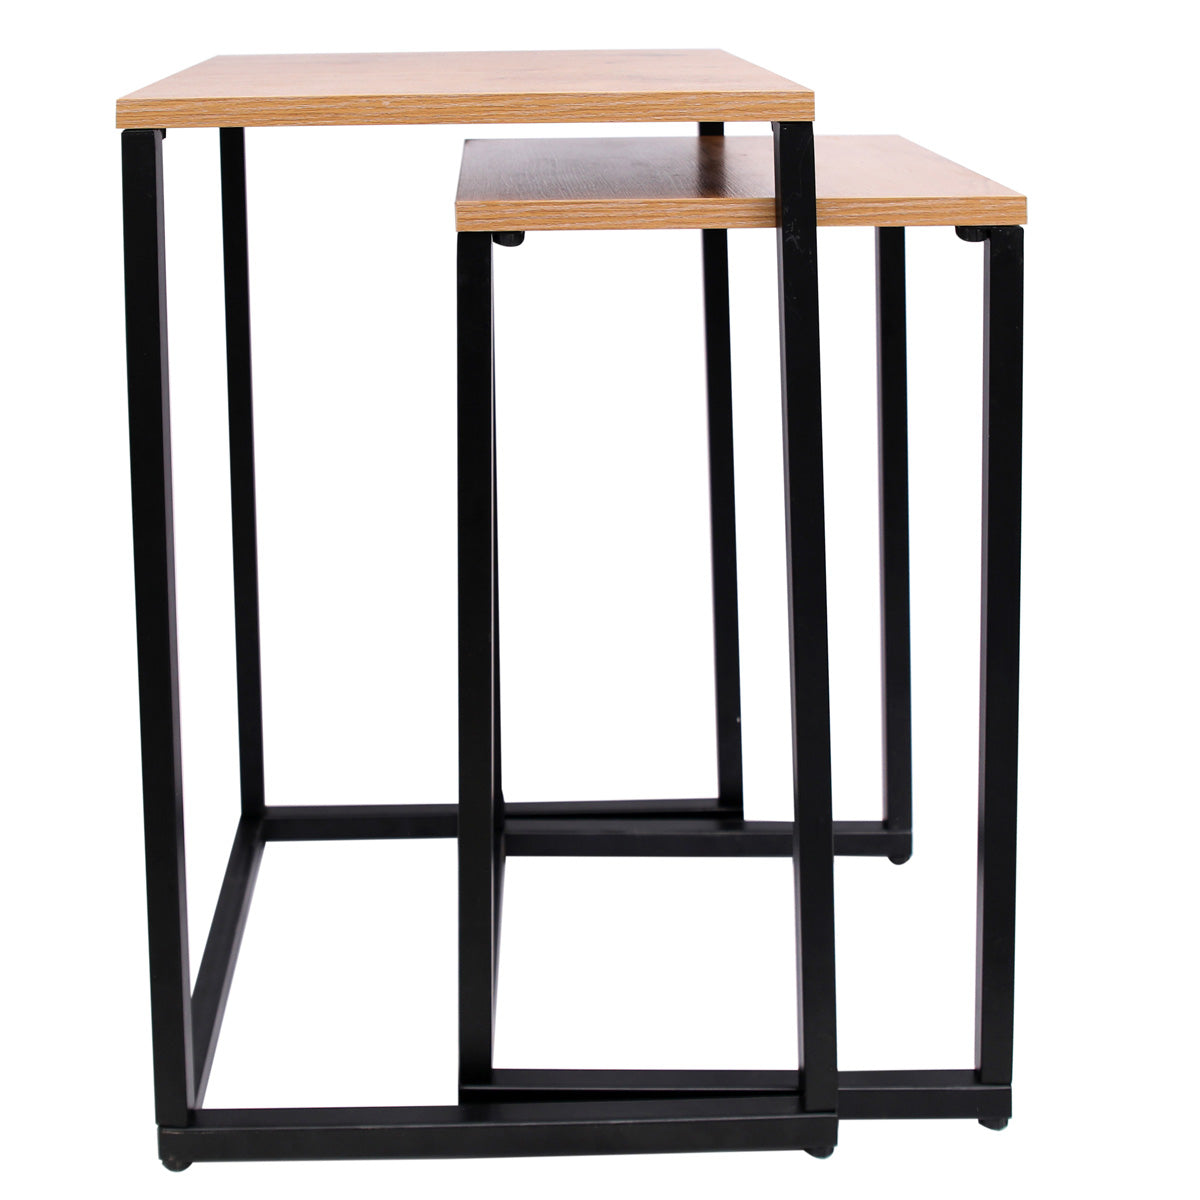 Kent S Series Nest of Side Table